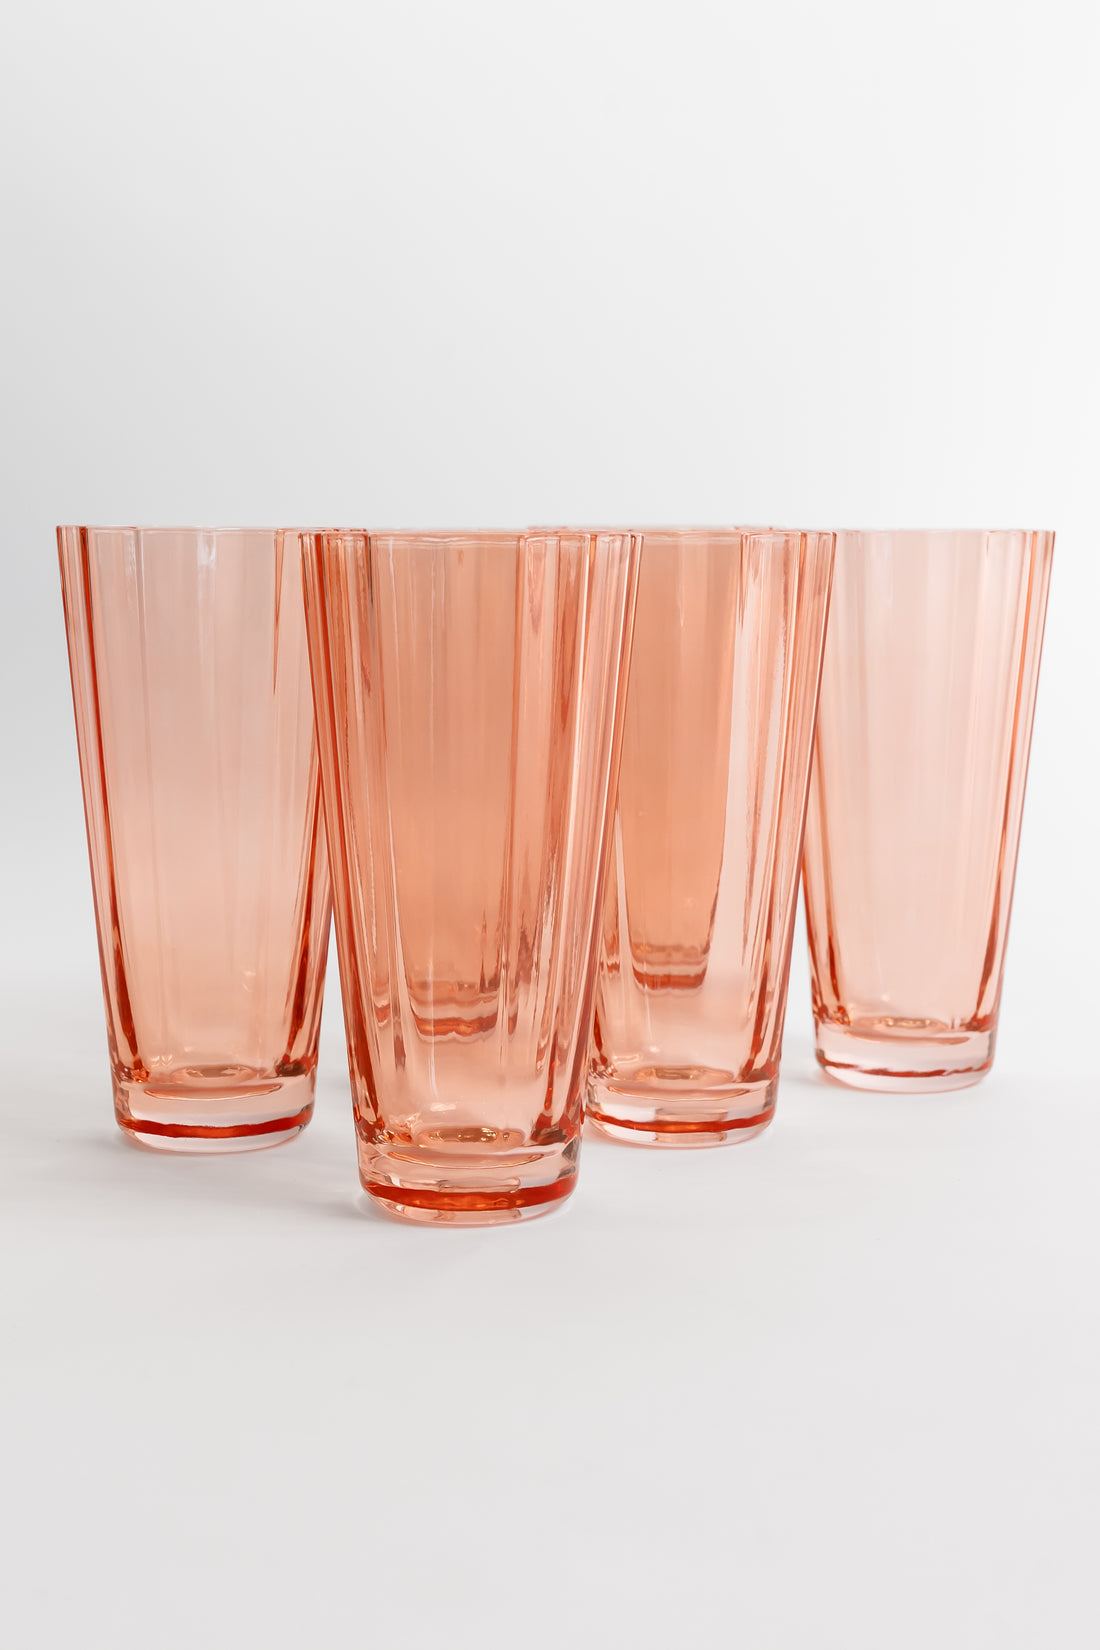 Estelle Colored Sunday High Balls - Set of 6- Peach Fuzz {Our Coral Peach Pink}